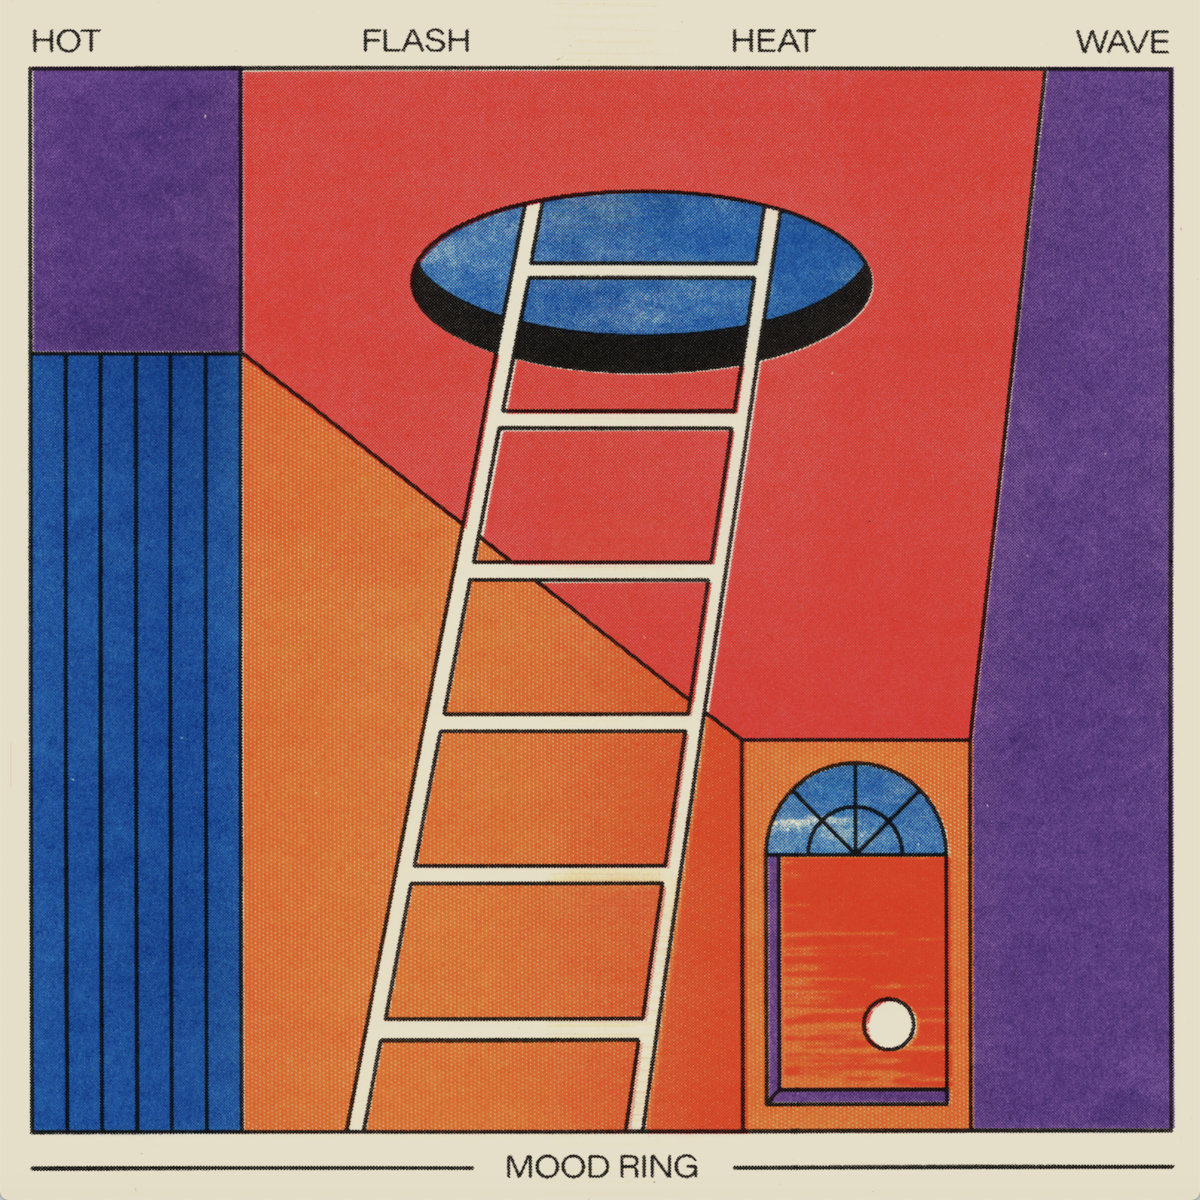 The album cover is colorful, minimalistic picture of a ladder leading up to an open hole in the ceiling